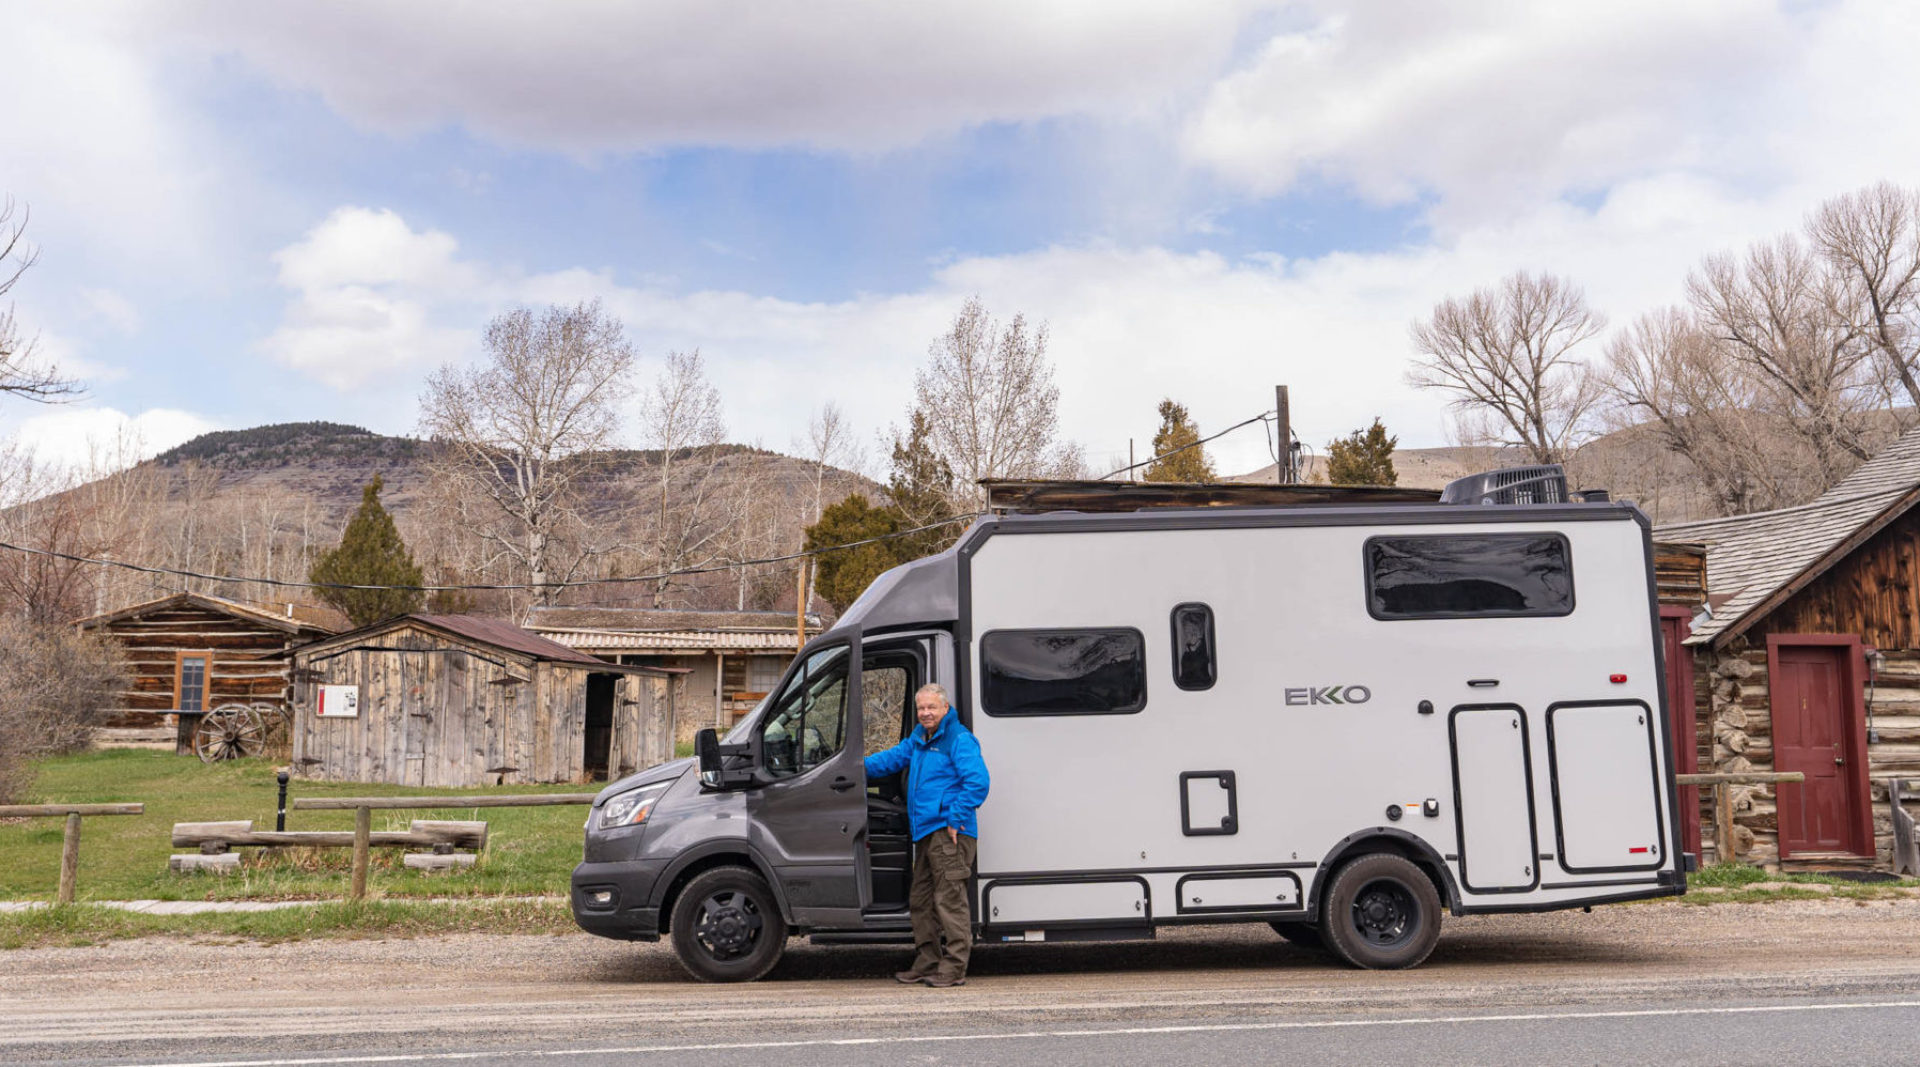 Think you’d like RV Living? Try a Rental! Here’s how to succeed on your first adventure.